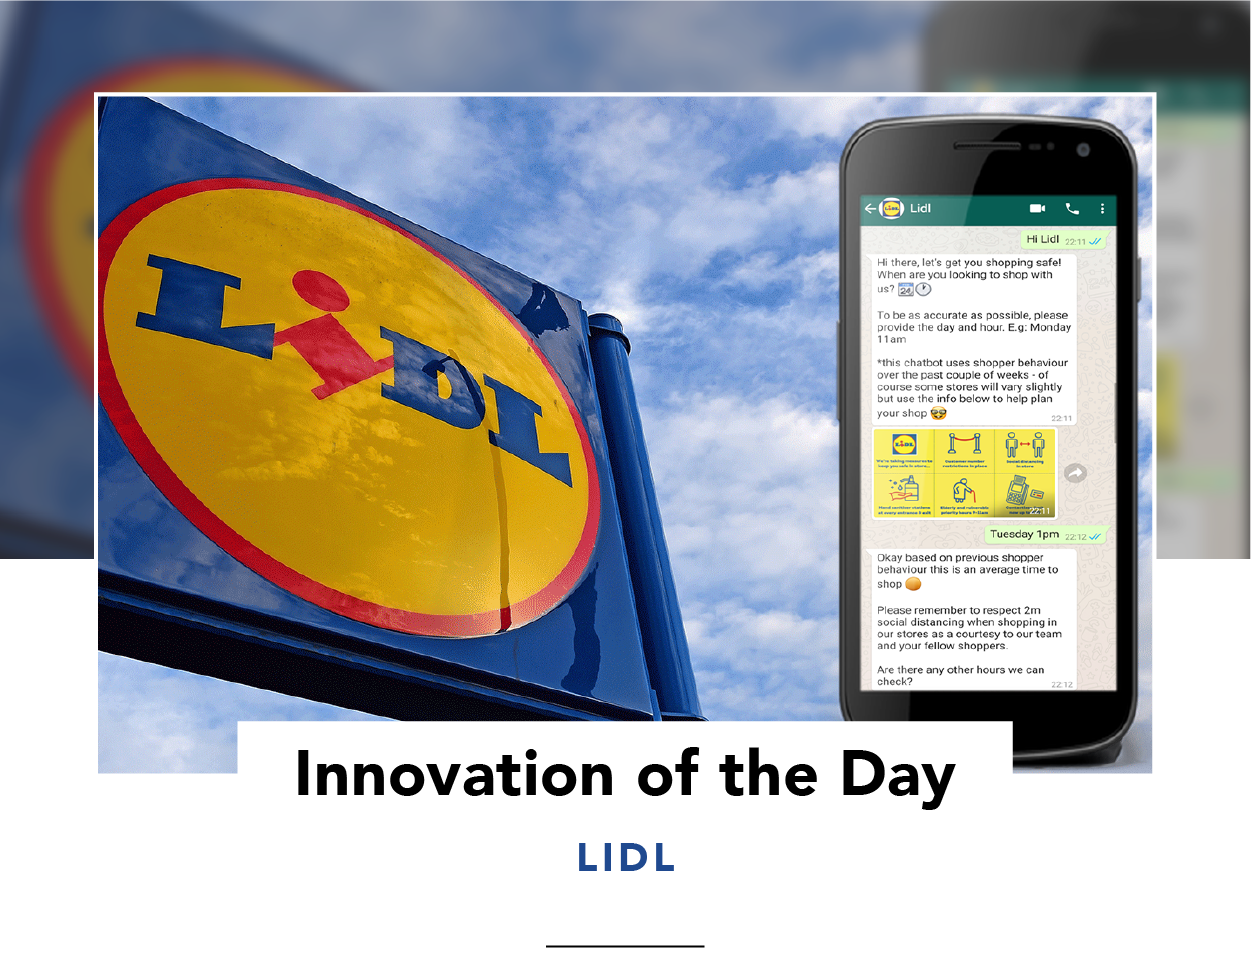 katje Cyberruimte hoek Innovation of the Day | Lidl launched a WhatsApp chatbot to help customers  find the best times to do their grocery shopping